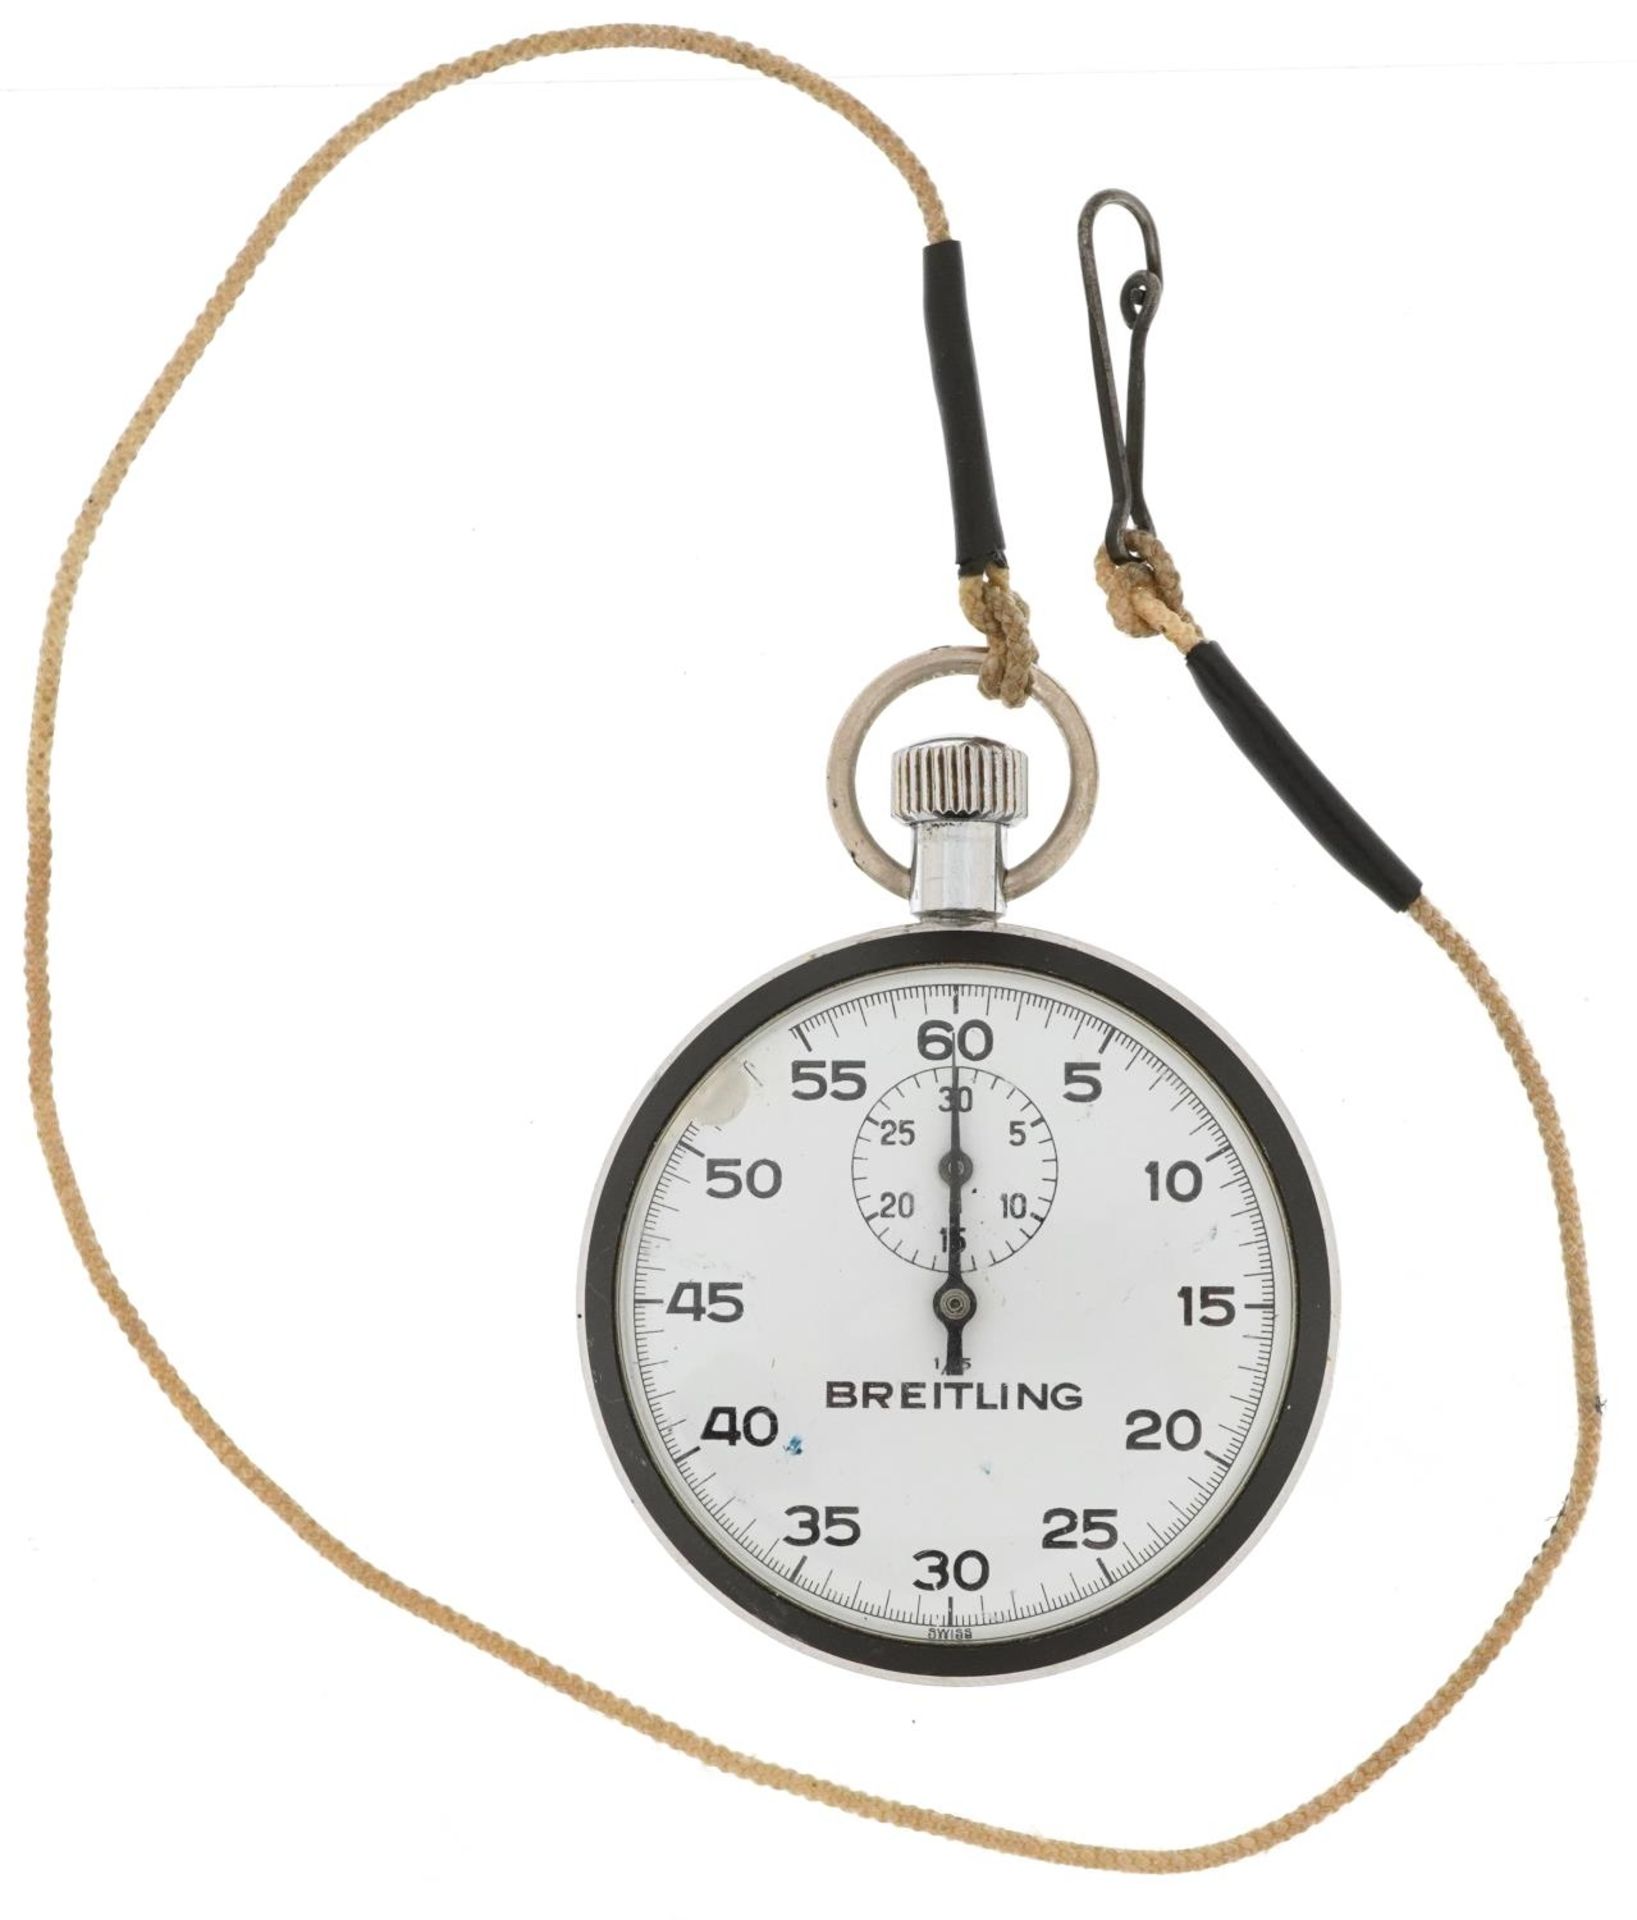 Breitling, chrome pocket watch having enamelled dials with Arabic numerals, 54mm in diameter - Image 2 of 3